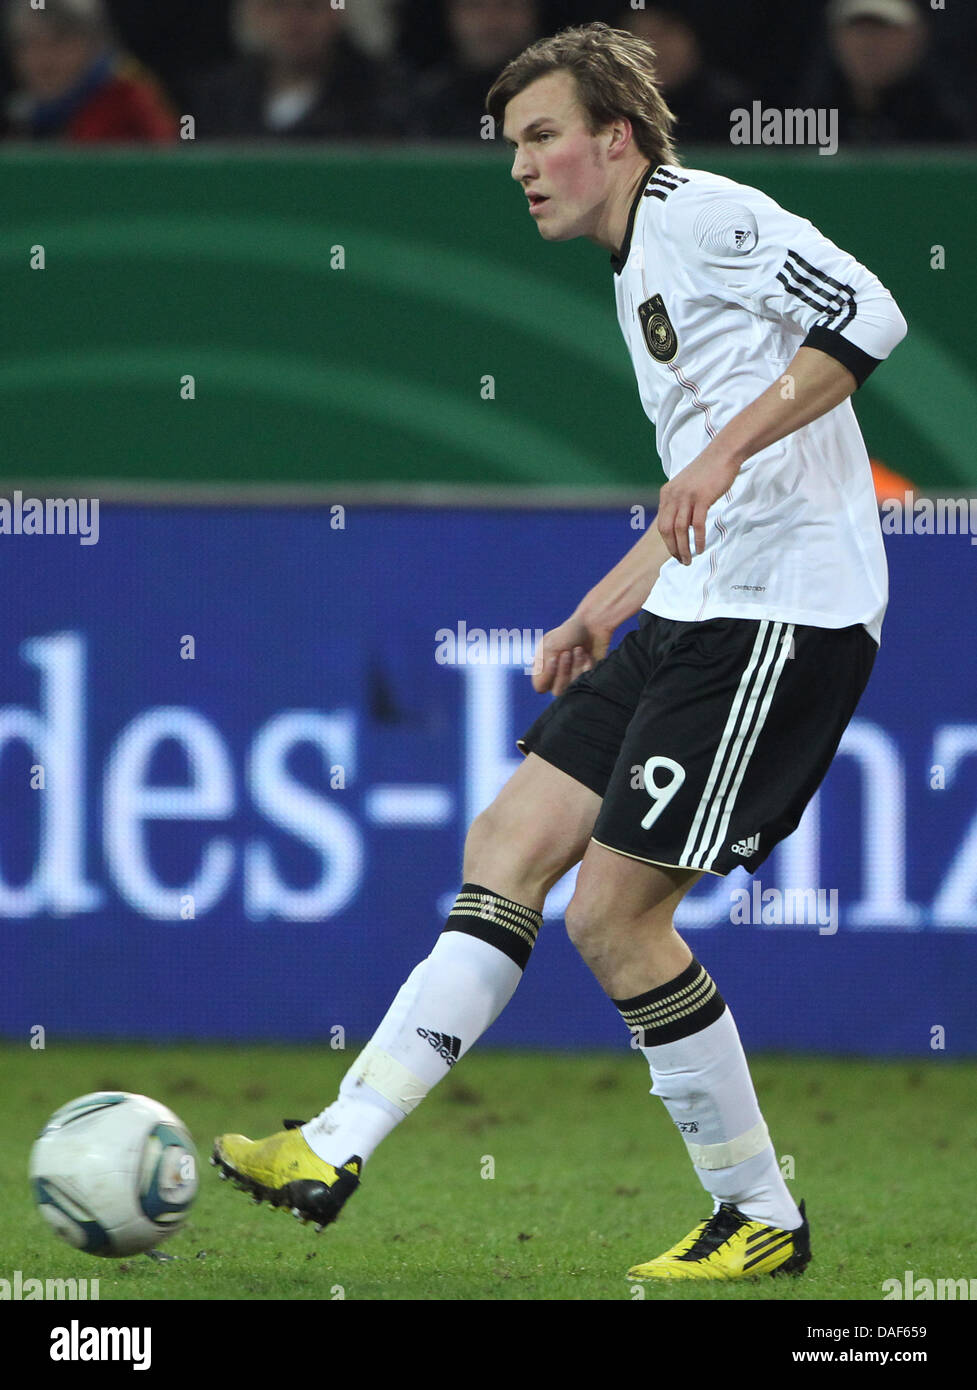 Germany's Kevin Grosskreutz in action during the friendly soccer match between Germany and Italy at Signal Iduna Park stadium in Dortmund, Germany, 09 February 2011. Photo: Friso Gentsch Stock Photo